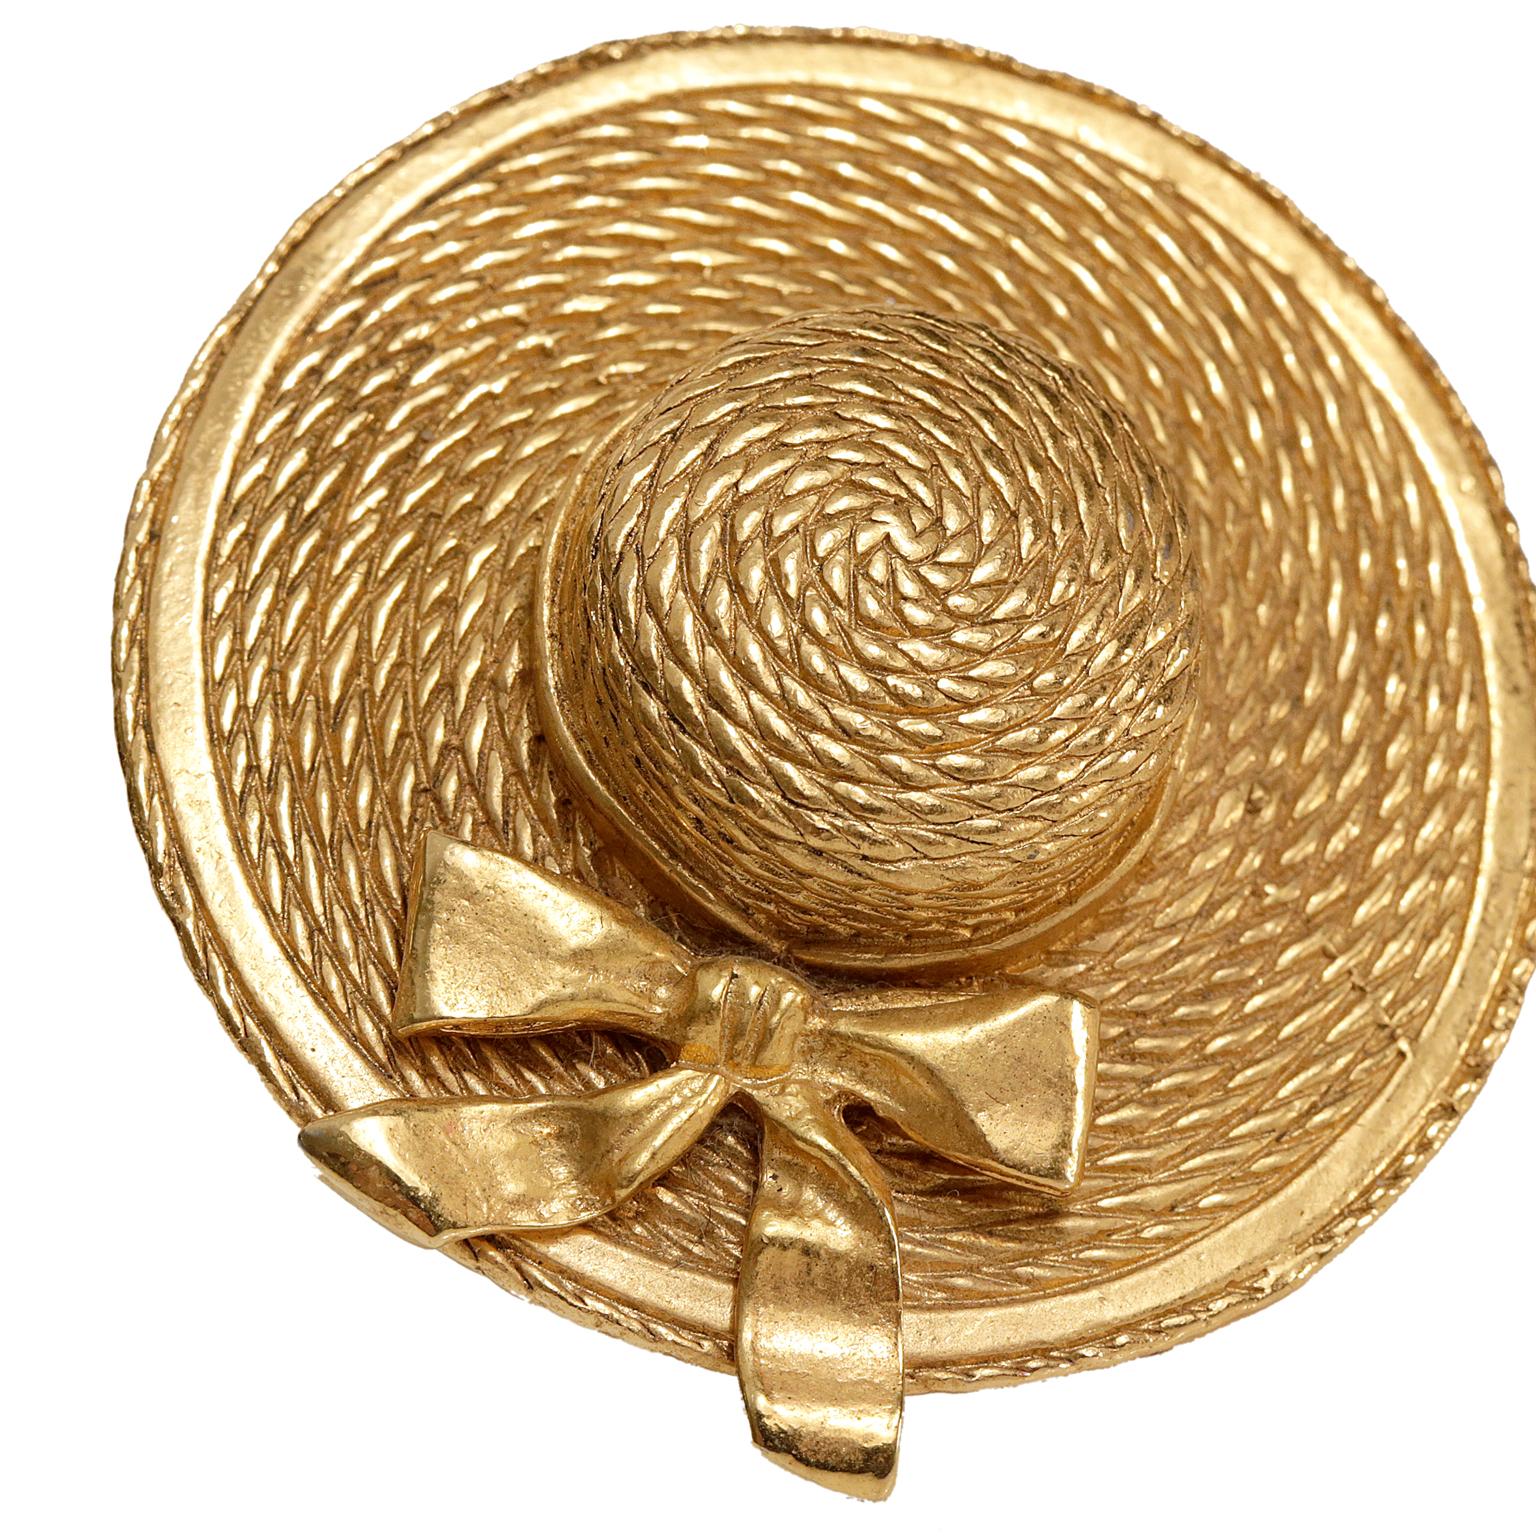 Chanel Gold Vintage Hat Pin- Excellent Condition
  A beautiful addition to any collection.  Gold tone straw hat with large bow.  Secures with a straight pin on the rear.  Made in France.
A487